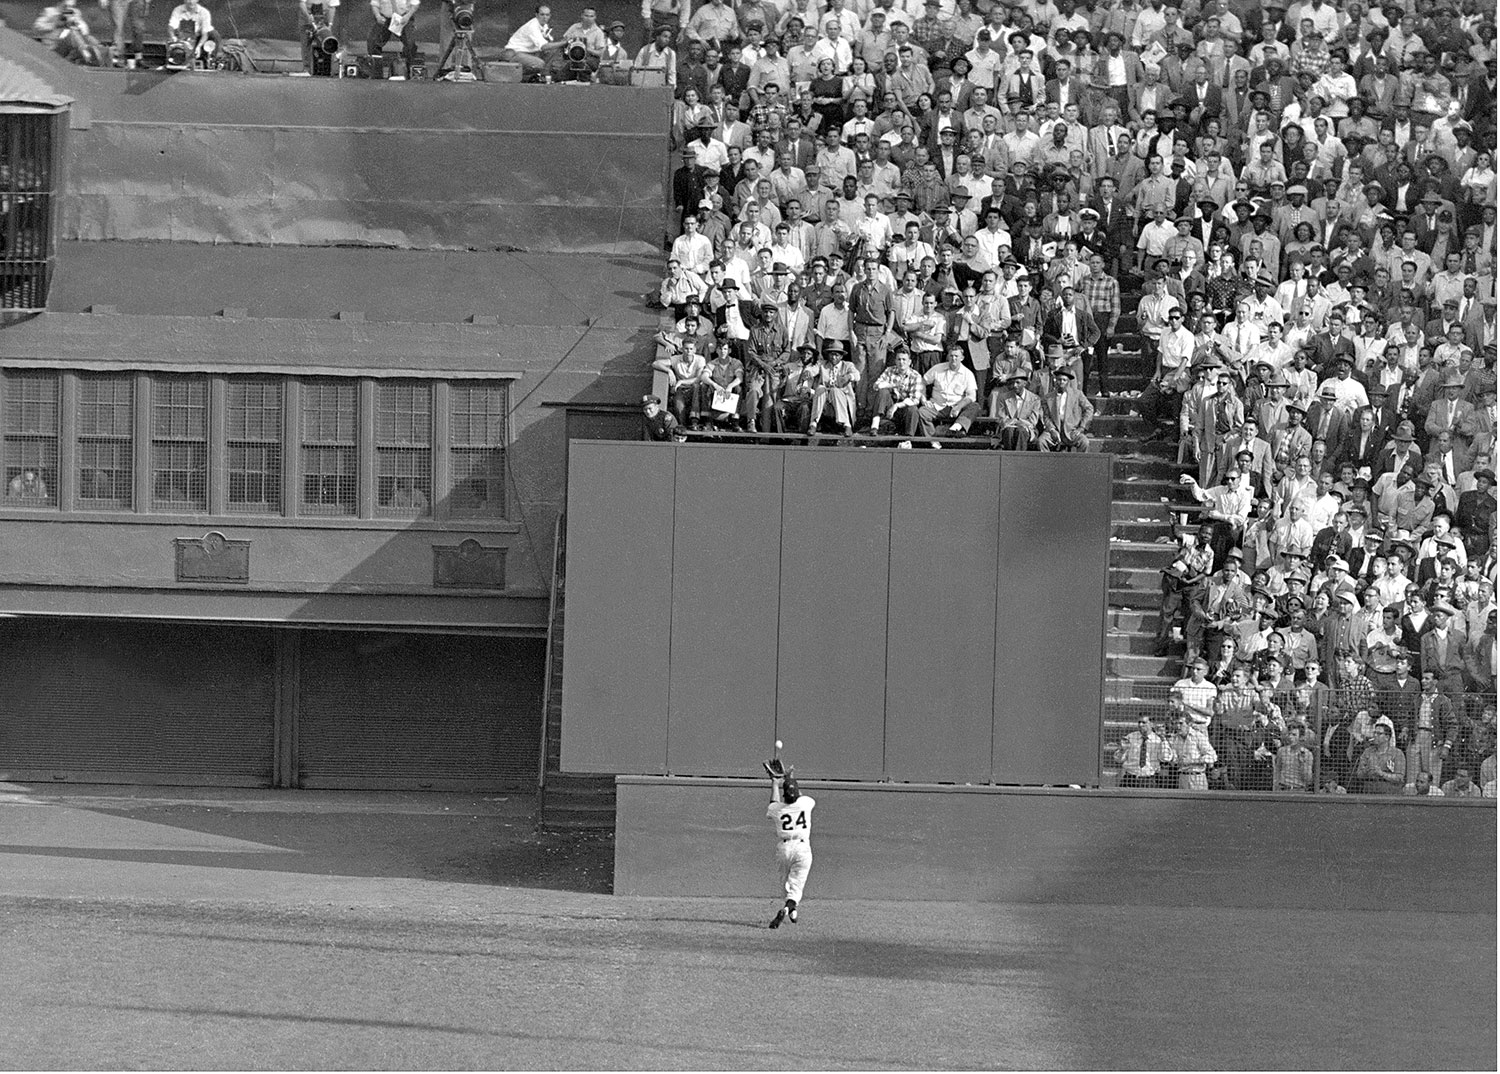 Sept. 29, 1954: Willie Mays of the New York Giants makes “The Catch” against the Clevland Indians in Game 1. It is considered one of the most spectacular catches in World Series history.